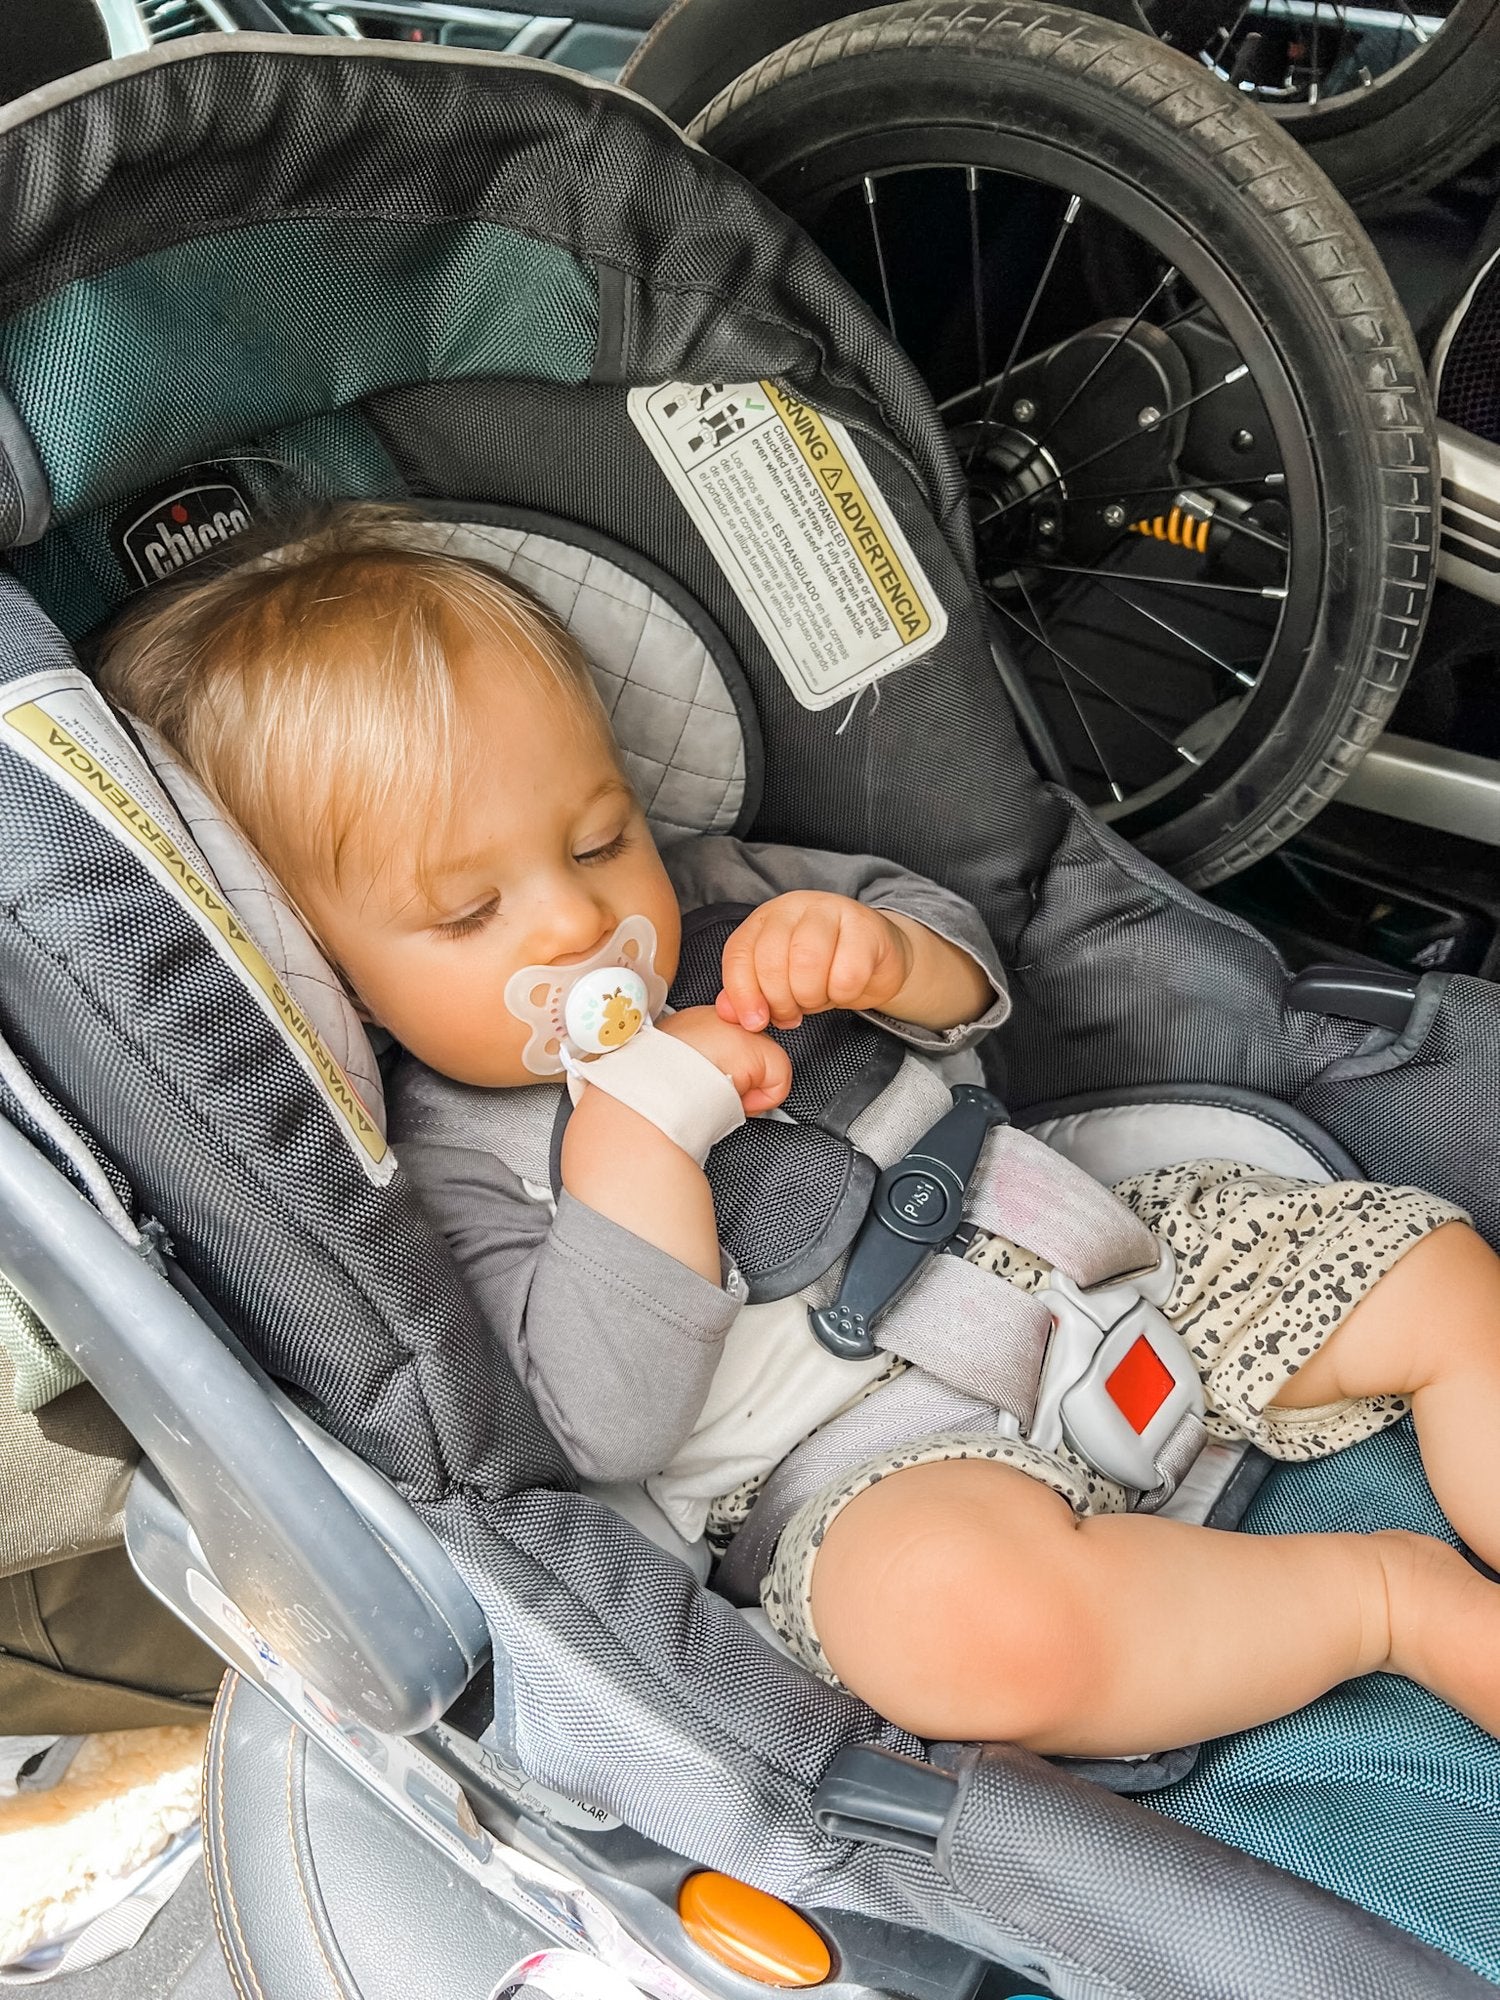 Driving Safety with a Baby